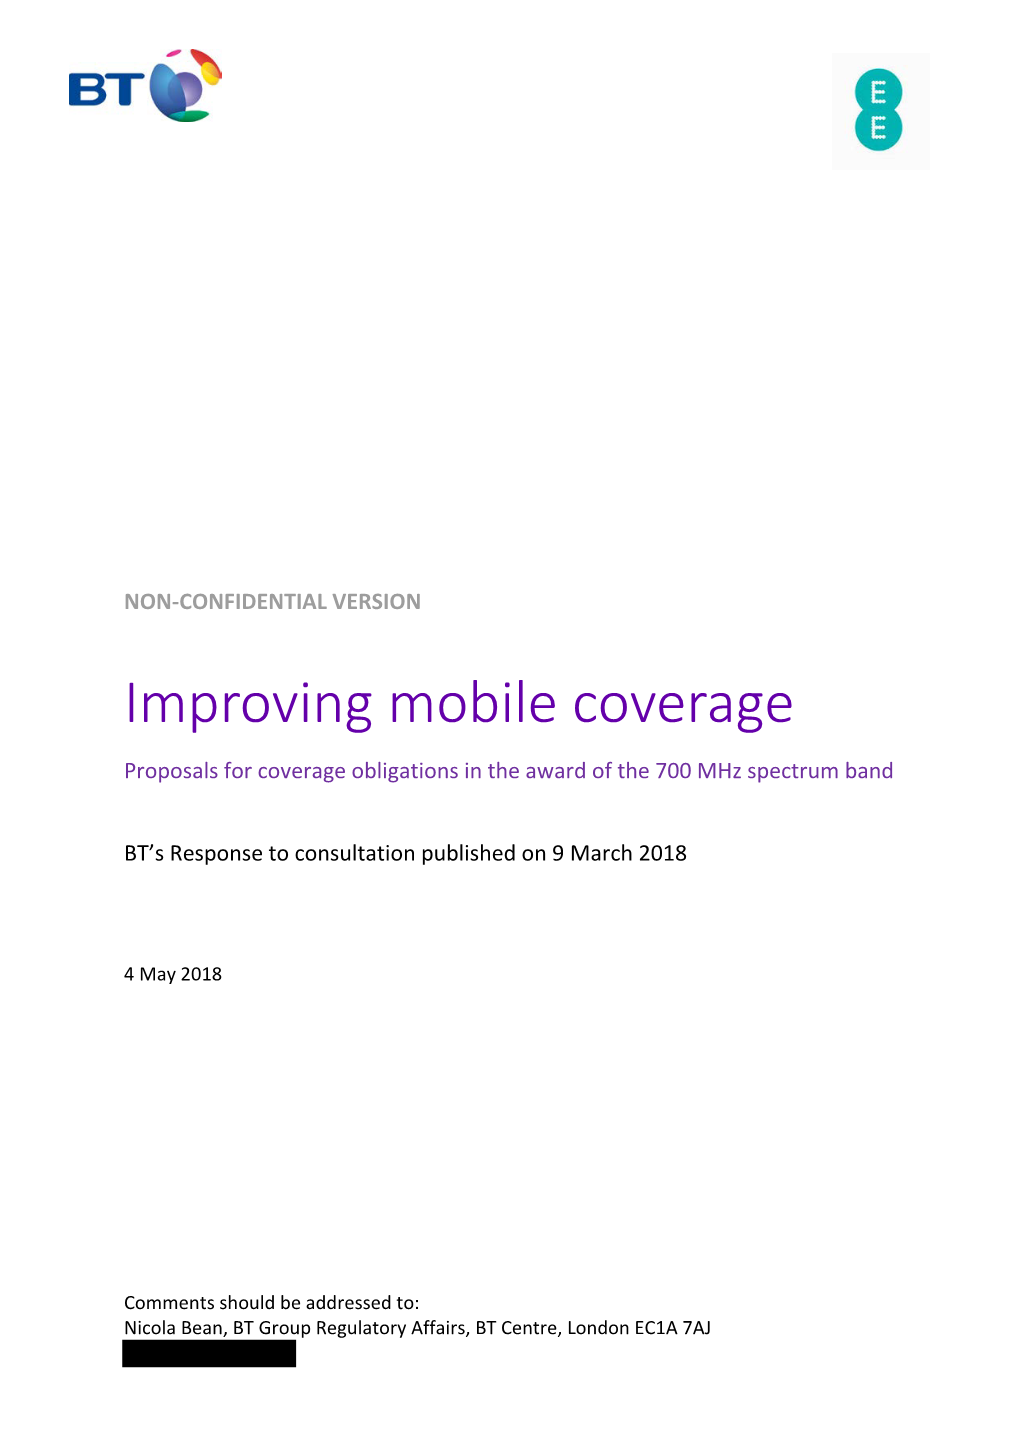 Improving Mobile Coverage Proposals for Coverage Obligations in the Award of the 700 Mhz Spectrum Band